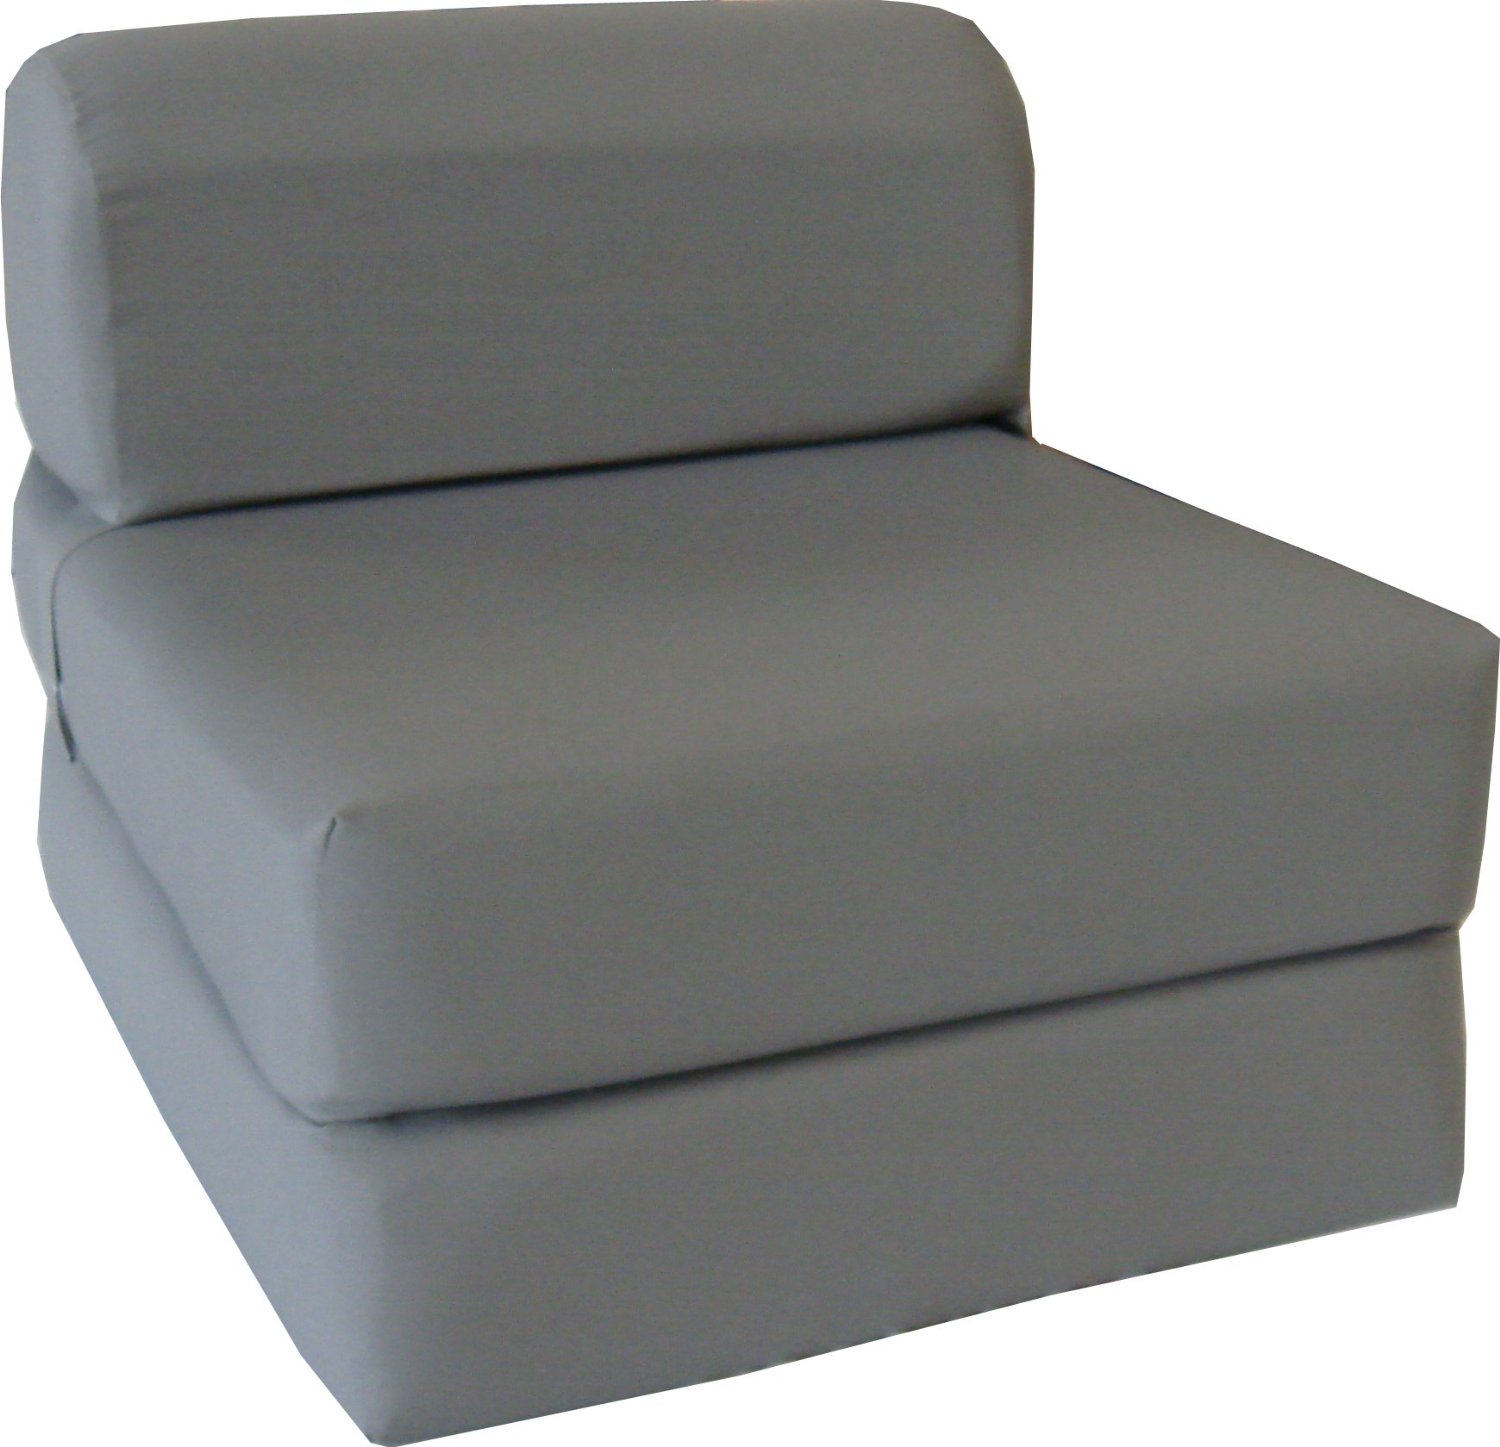 Gray Sleeper Chair Folding Foam Bed Sized 6" Thick X 32" Wide X 70" Long, Studio Guest Foldable Chair Beds, Foam Sofa, Couch, High Density Foam 1.8 Pounds.